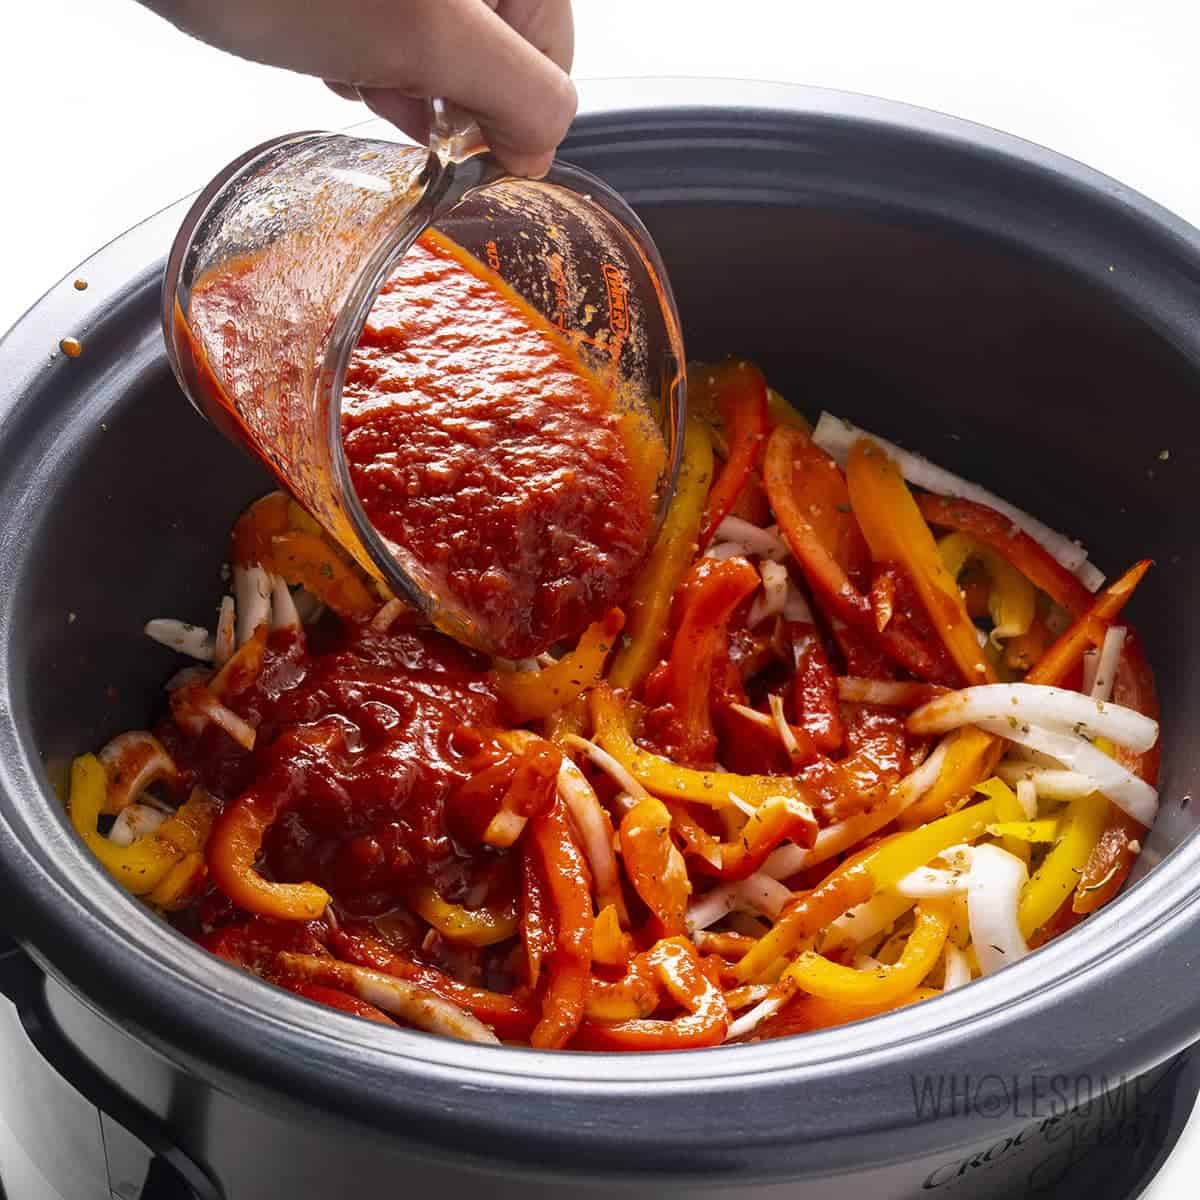 Marinara being poured over the sausage and peppers recipe in slow cooker.